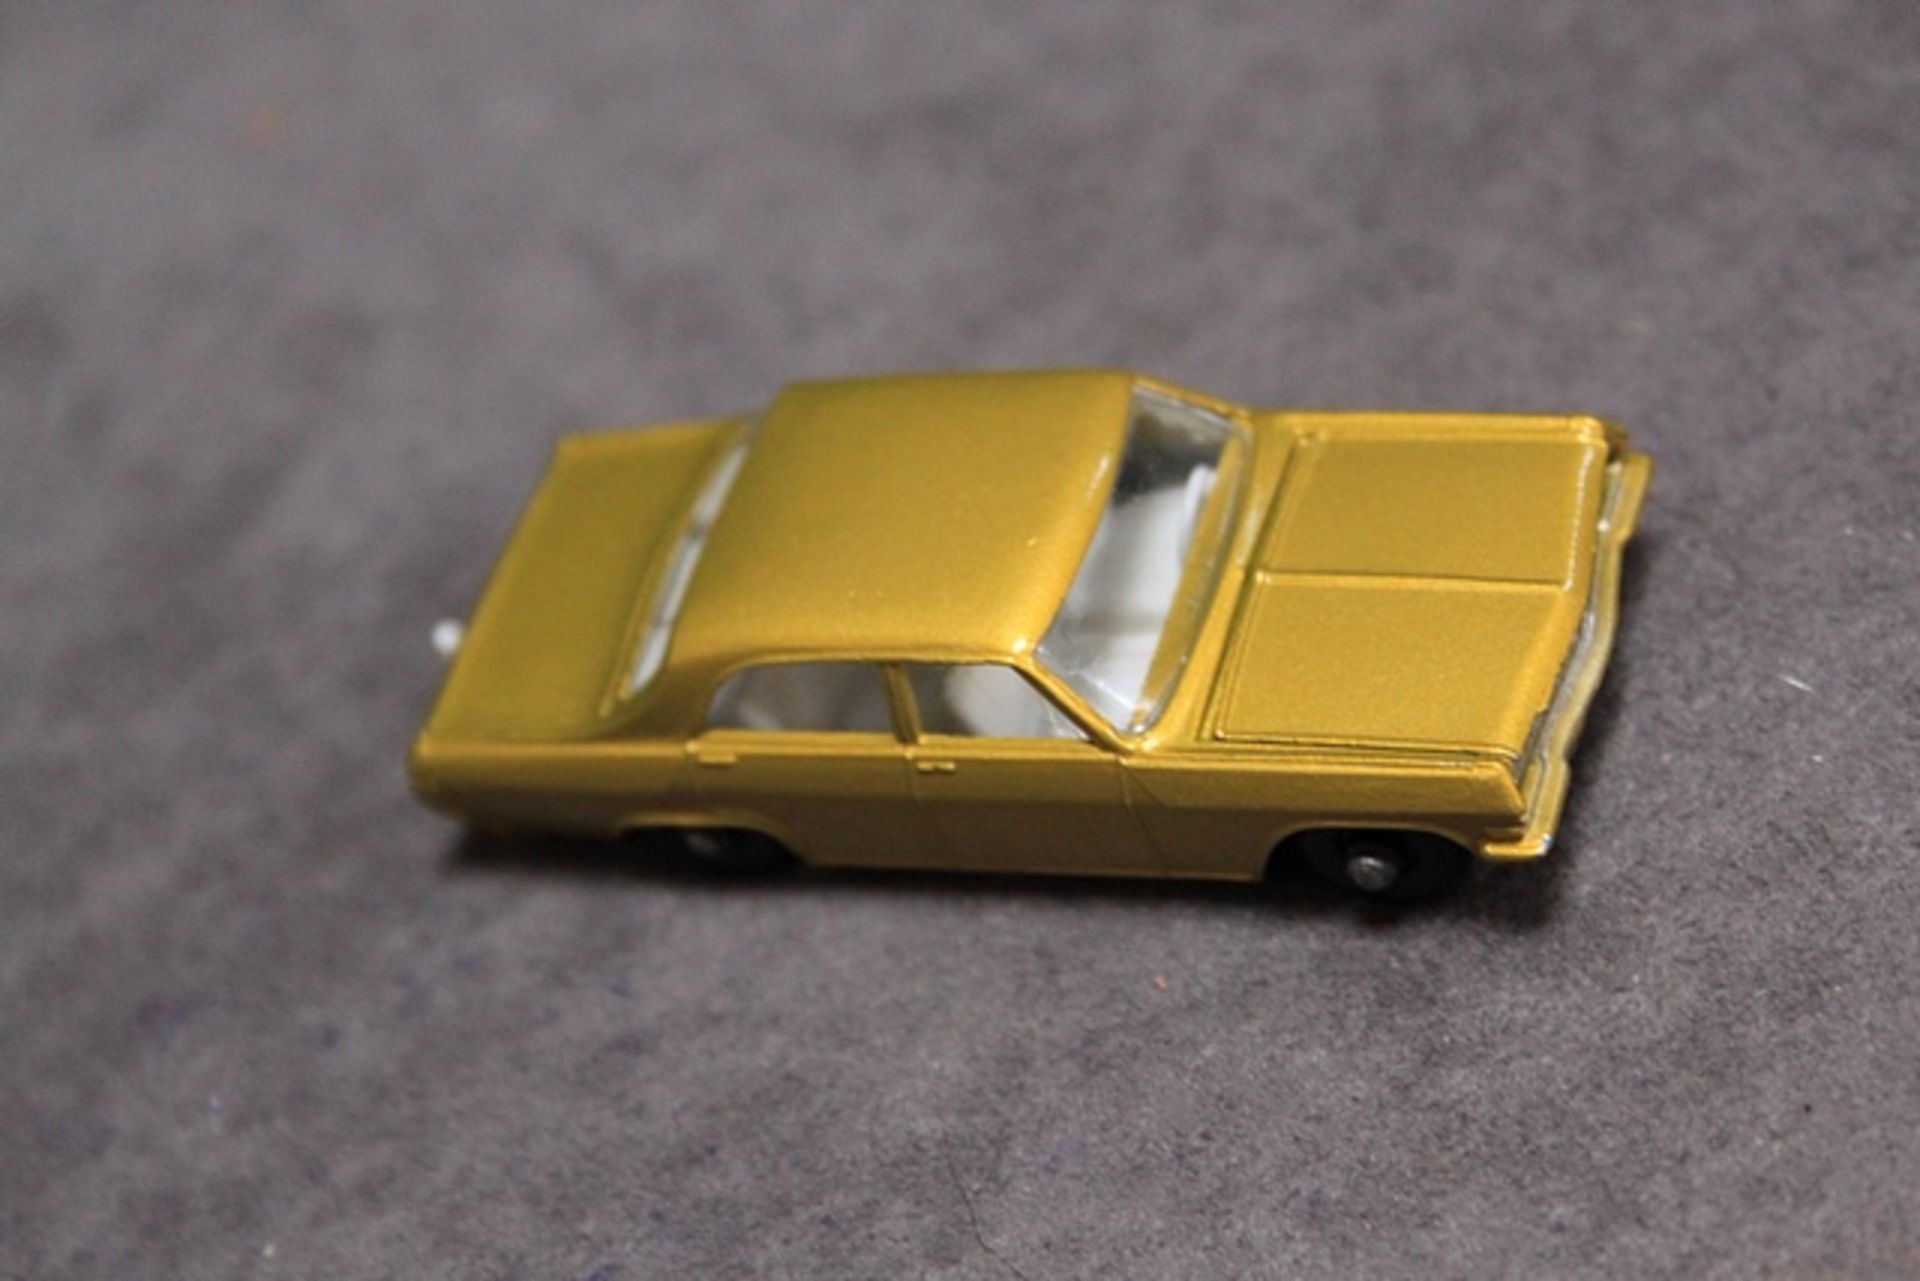 Mint Matchbox Series diecast #36 Opel Diplomat in gold in firm excellent rarer box - Image 3 of 3